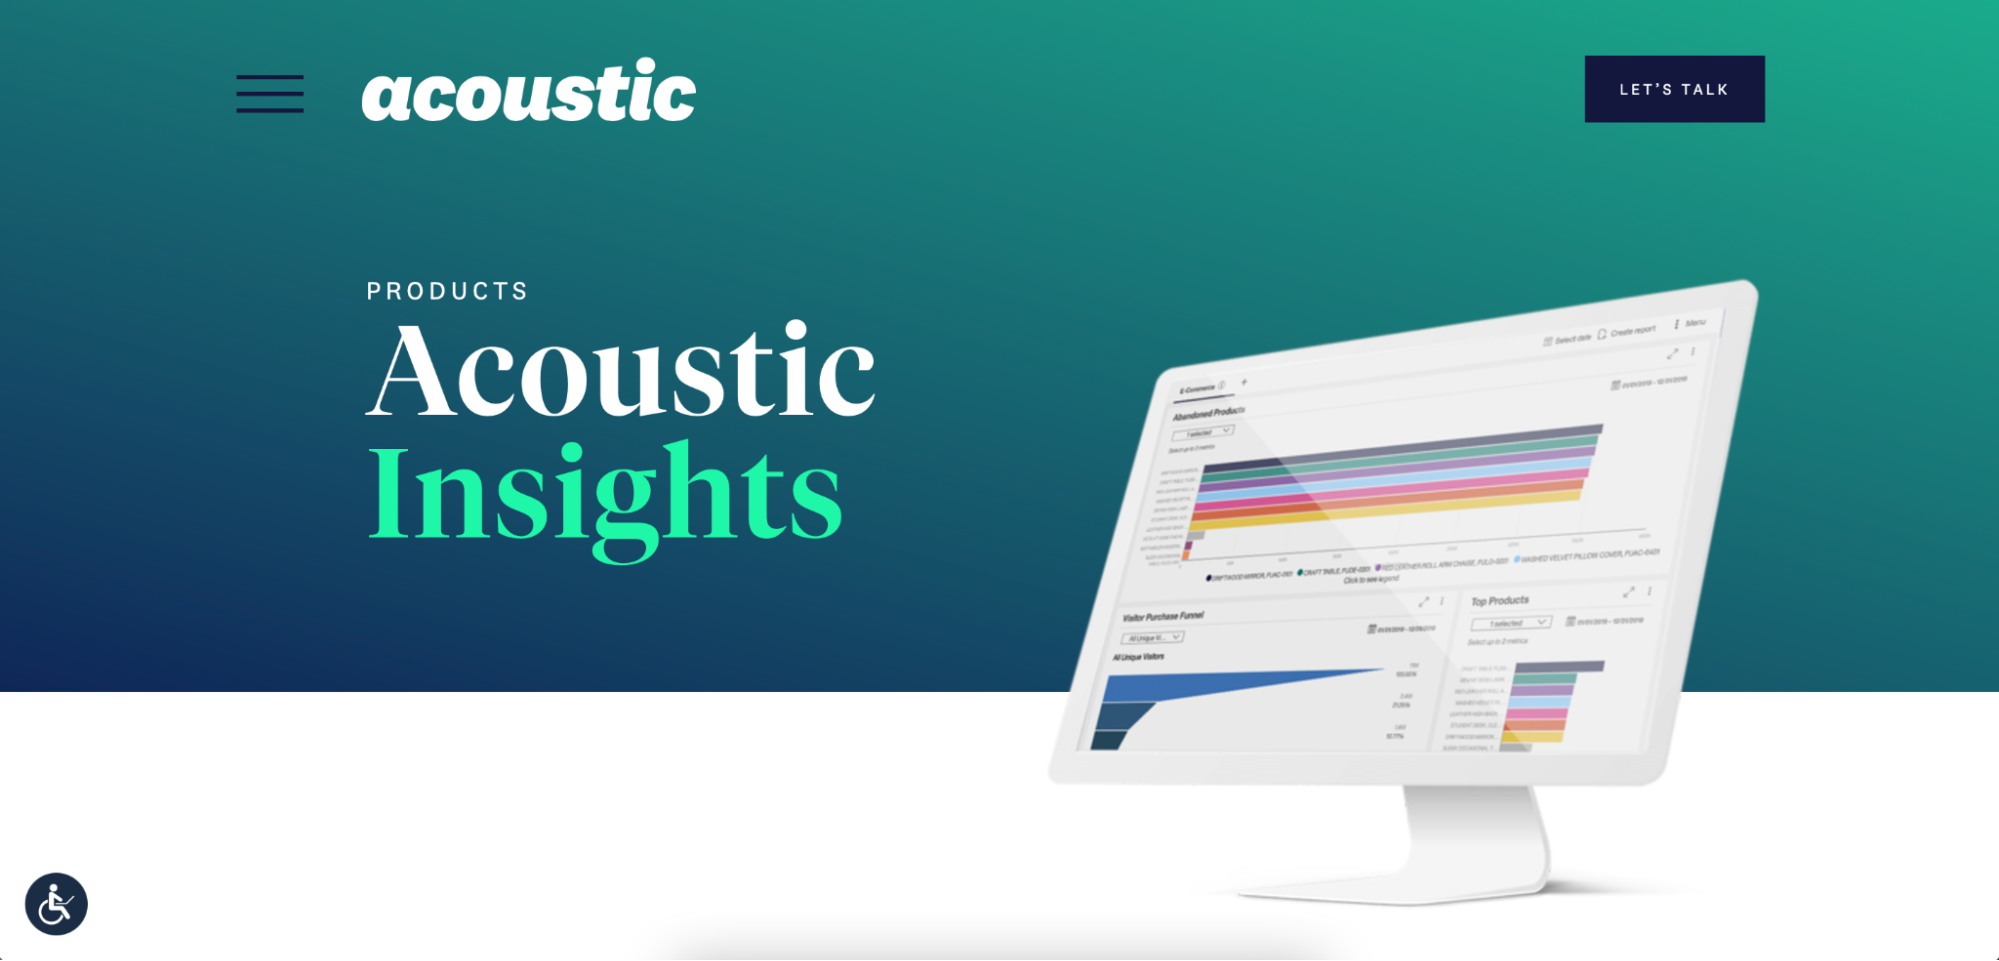 Acoustic Insights